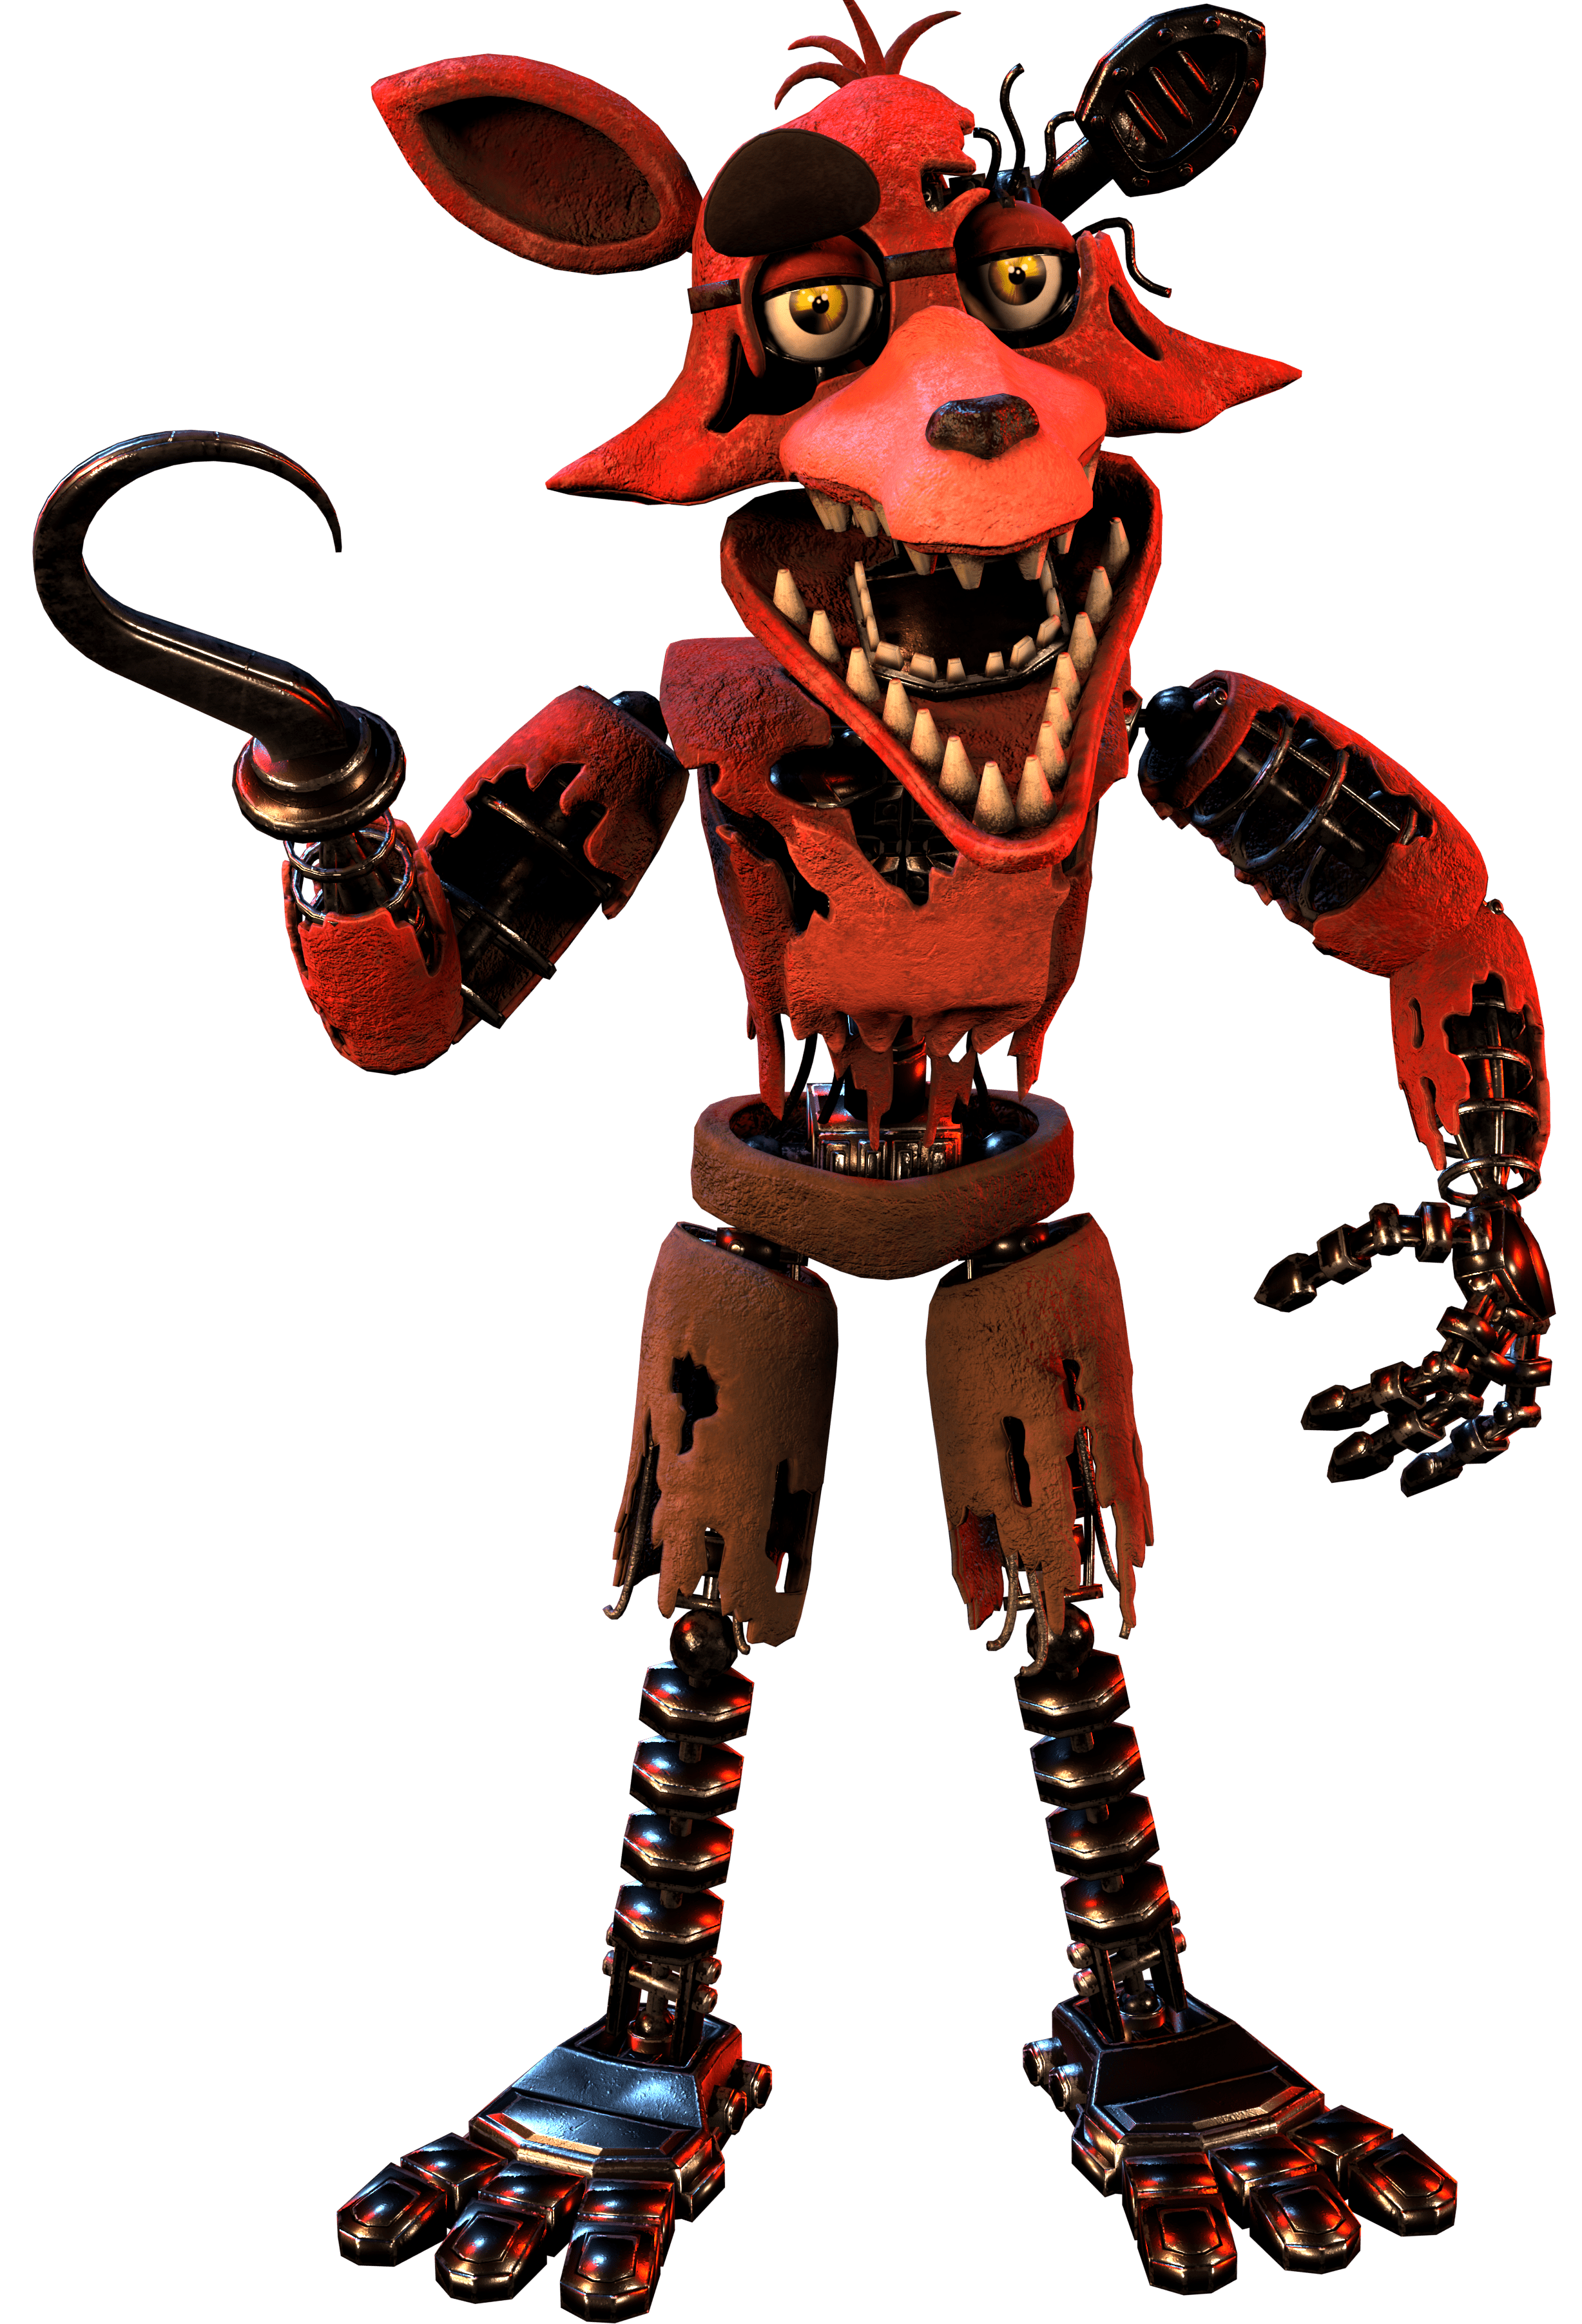 Foxy The Pirate Villains Wiki Fandom - how to get molten location badge in roblox five nights at freddys 2 youtube